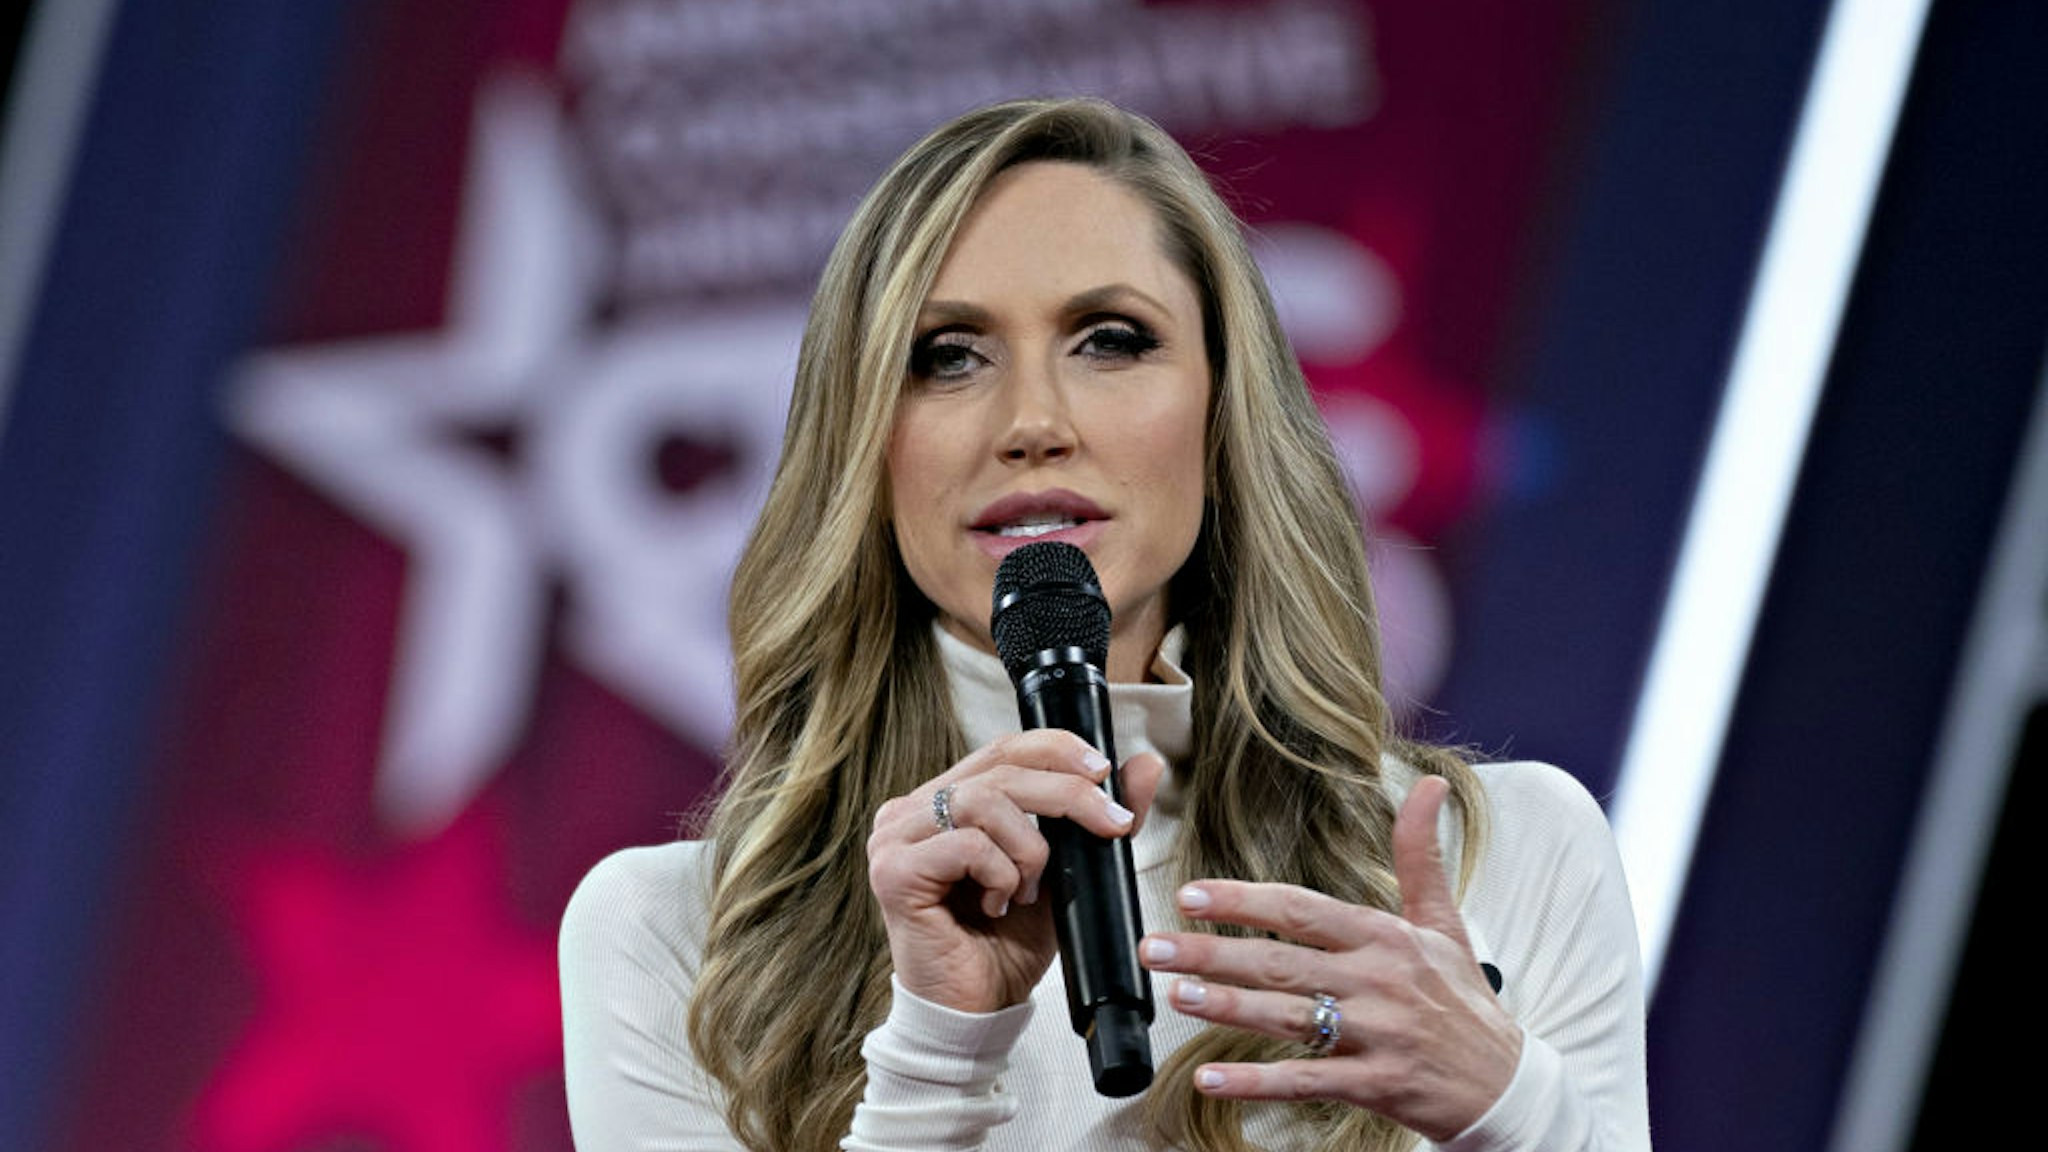 Lara Trump, adviser to U.S. President Donald Trump, speaks during a discussion at the Conservative Political Action Conference (CPAC) in National Harbor, Maryland, U.S., on Friday, Feb. 28, 2020. President Trump will address this years CPAC after seeking to close ranks within his administration about the threat posed by the coronavirus and how the U.S. government plans to stop its spread following mixed messages that rattled Wall Street.